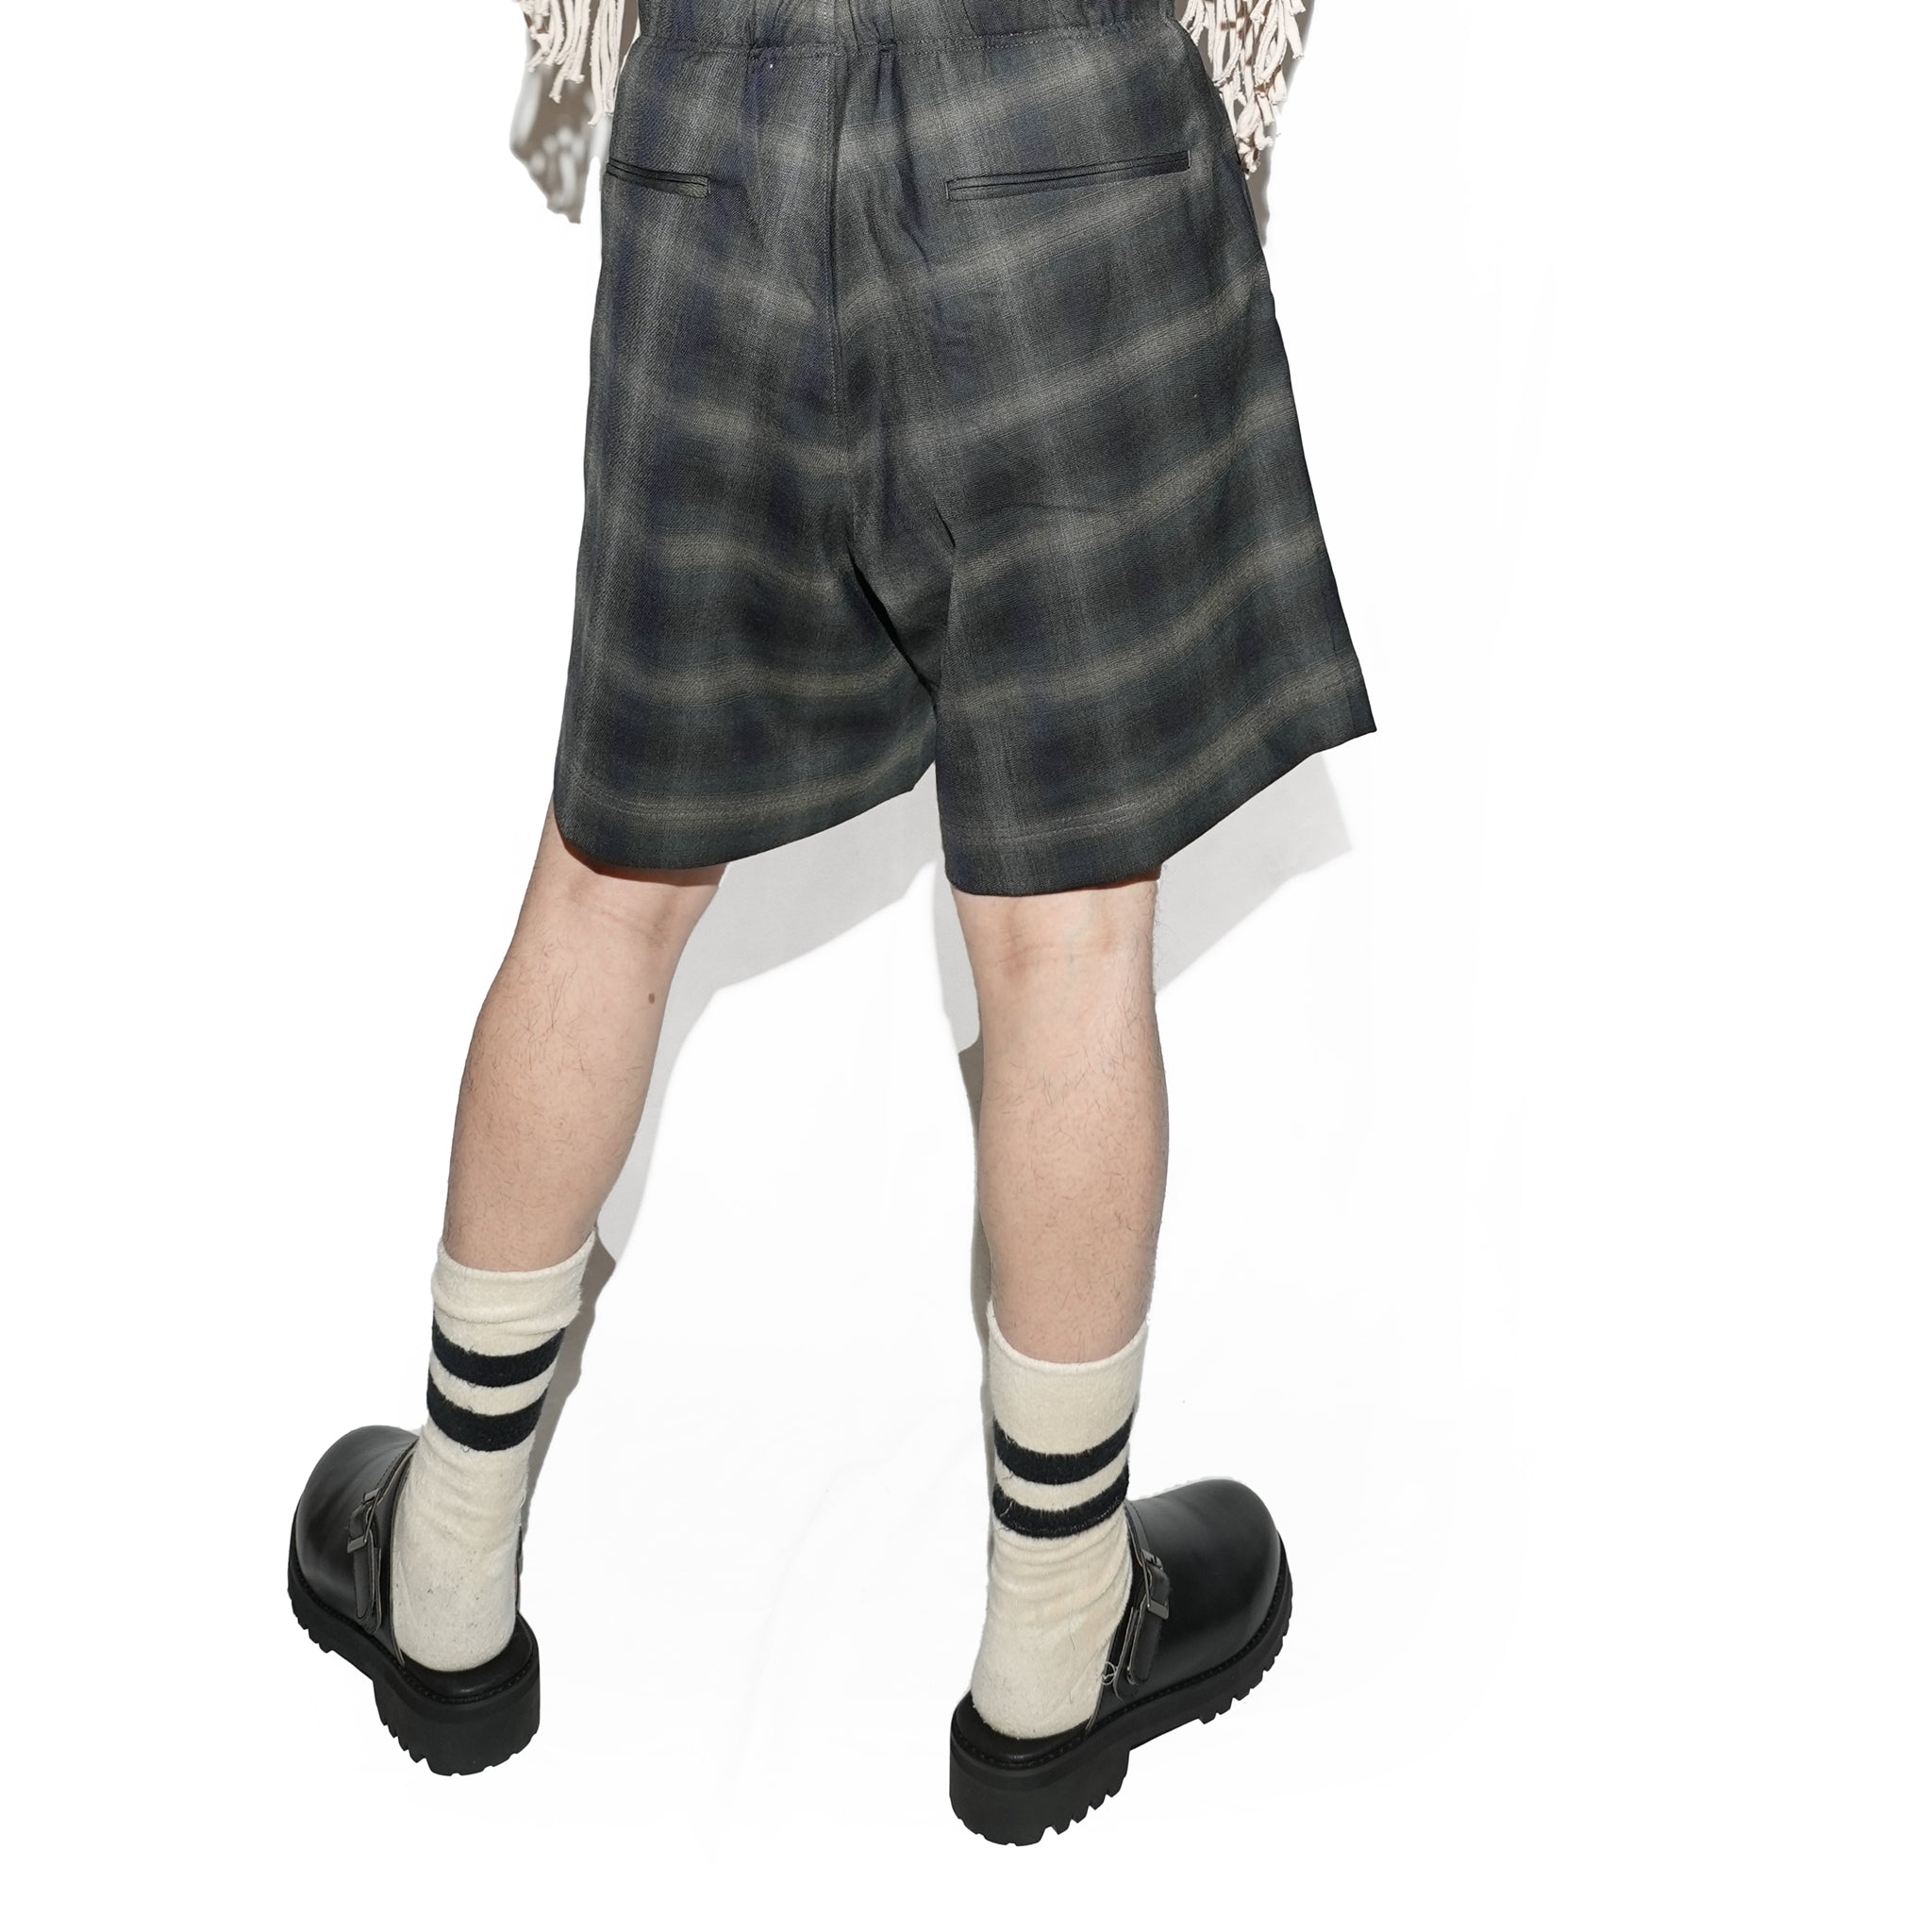 No:CT24S-SH03 | Name:izk_wide shorts100 | Color:Grn-Gry Check【CEASTERS_ケステル】